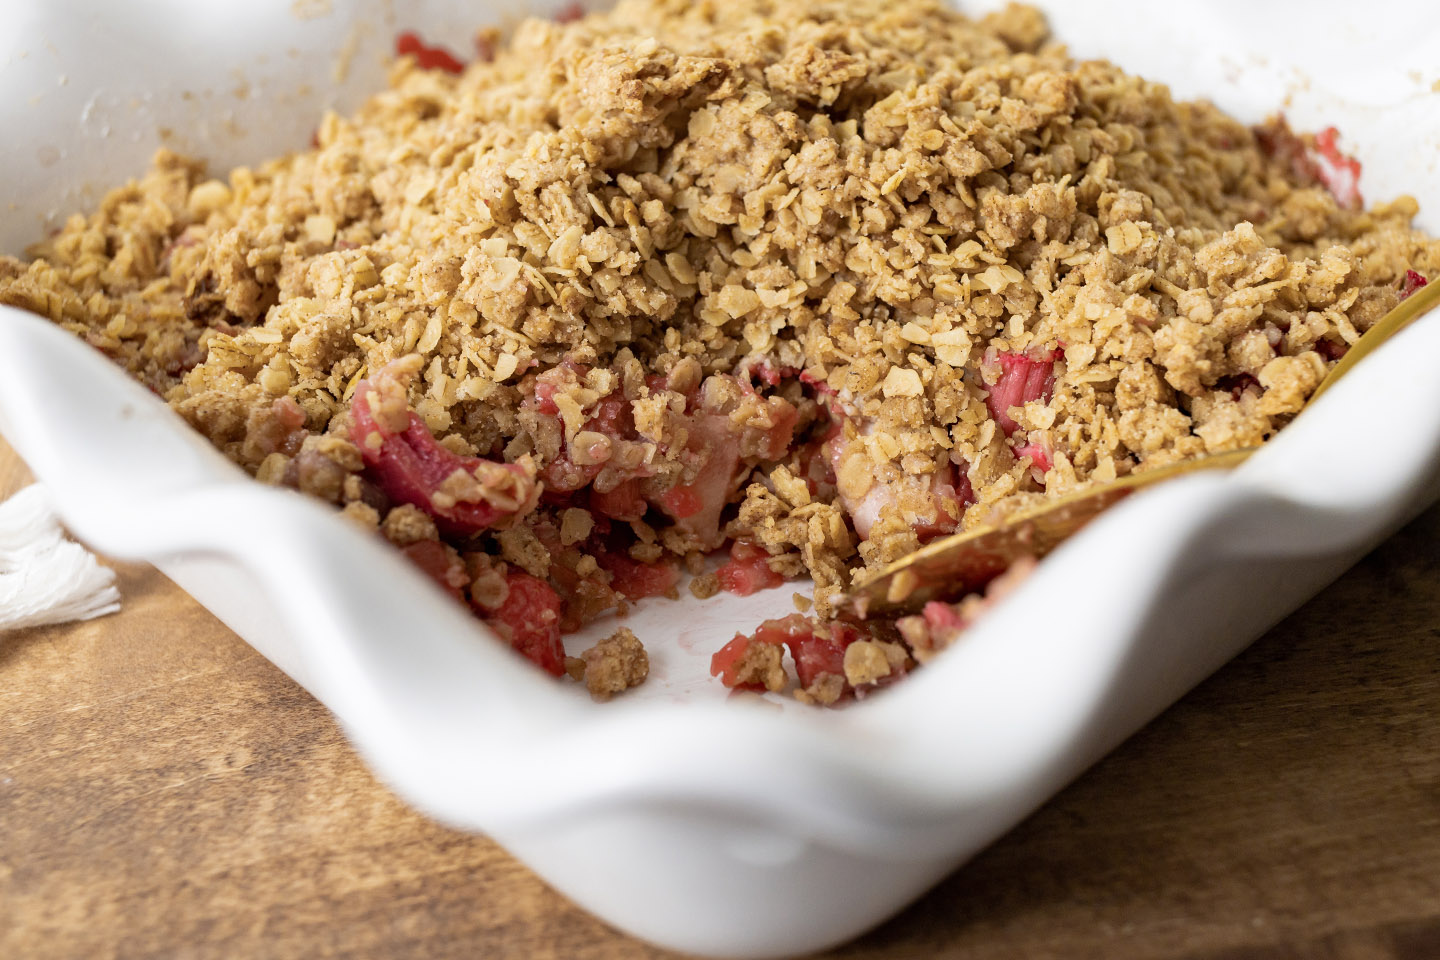 Rhubarb season is in full swing around here! I decided that the first thing I would bake this year is this strawberry rhubarb crisp recipe and I'm sharing it below if you need a new rhubarb recipe to try!